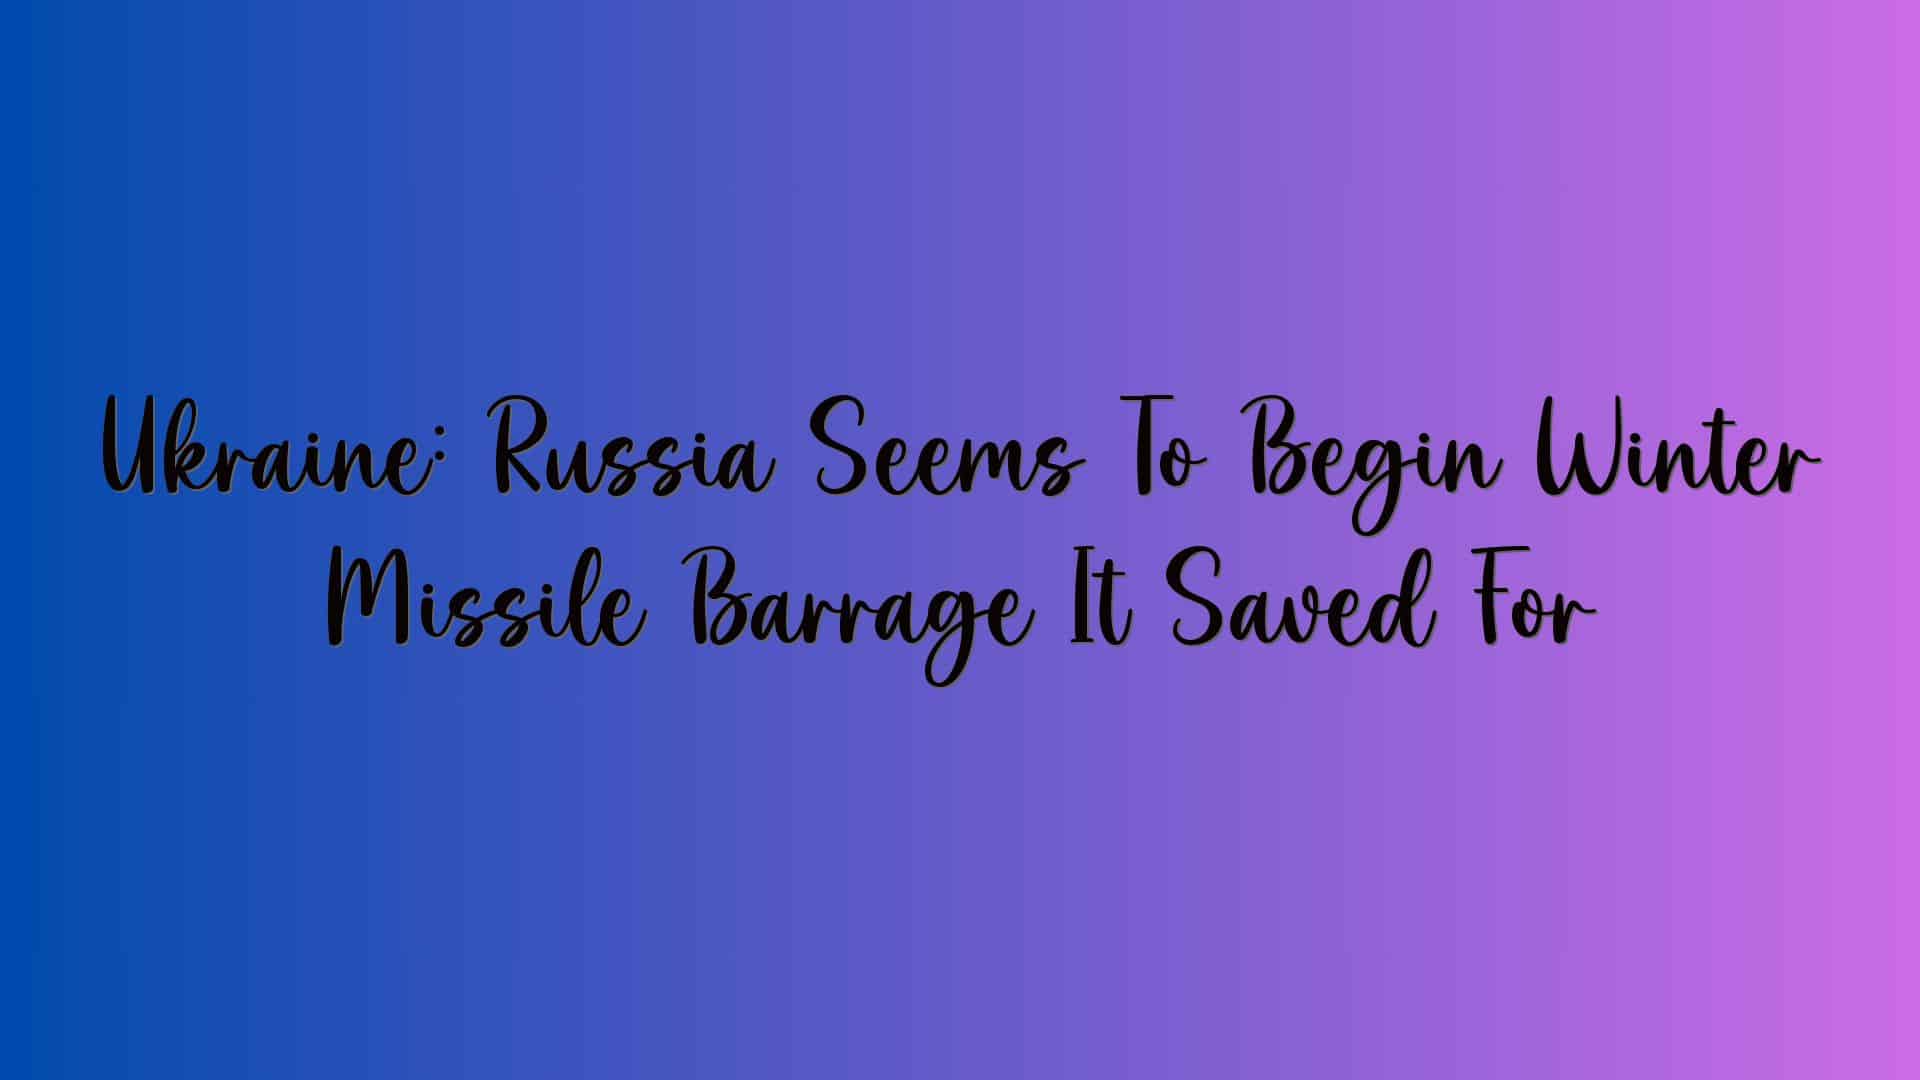 Ukraine: Russia Seems To Begin Winter Missile Barrage It Saved For